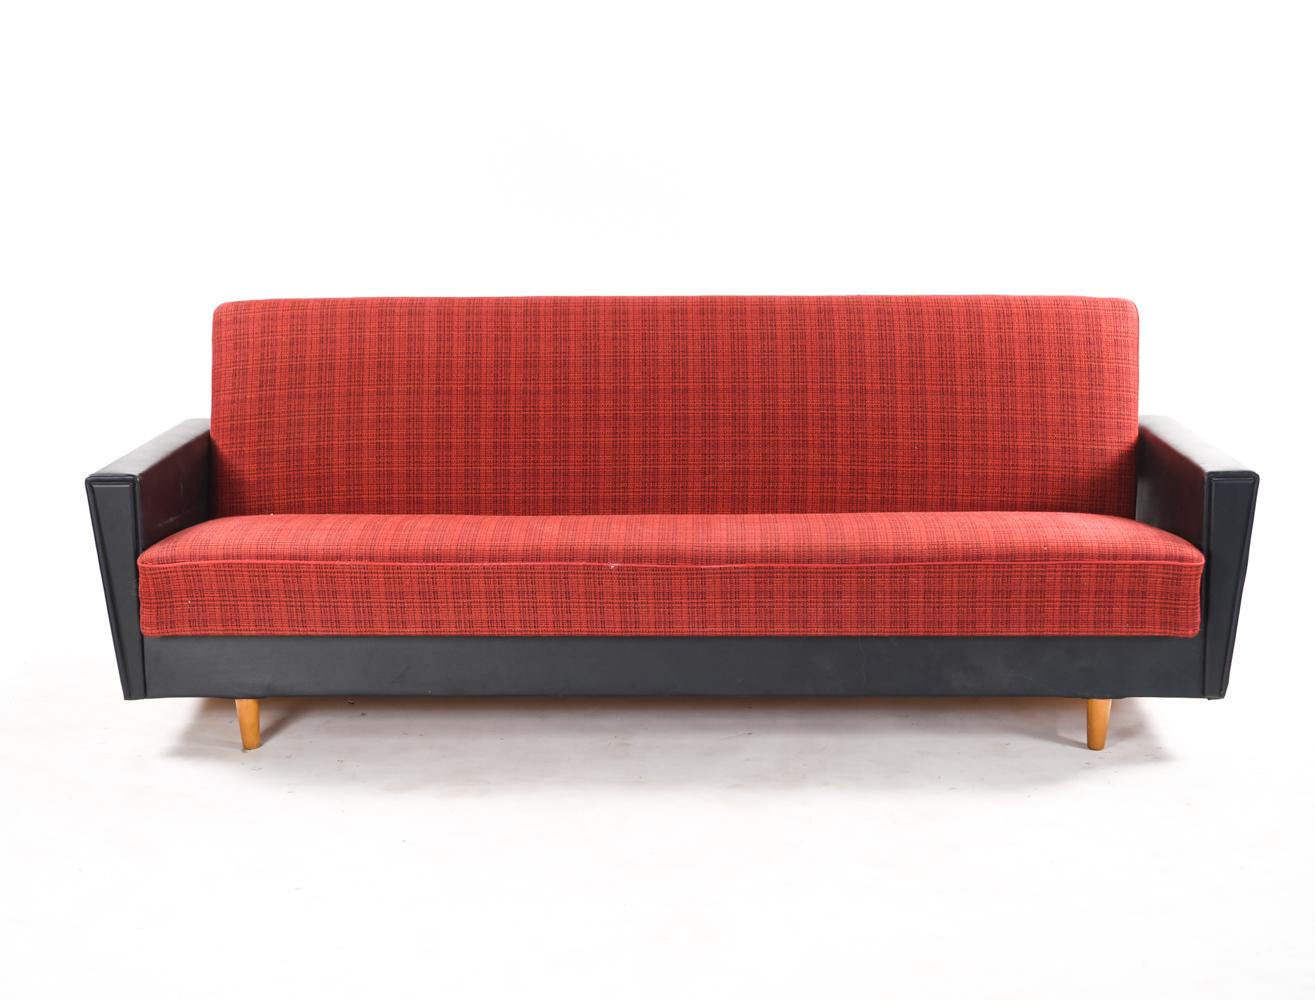 A Danish midcentury daybed or sofa with fabric and faux leather upholstery. An attractive juxtaposition of bold red and black faux leather which gives this piece a stylish edge to it.